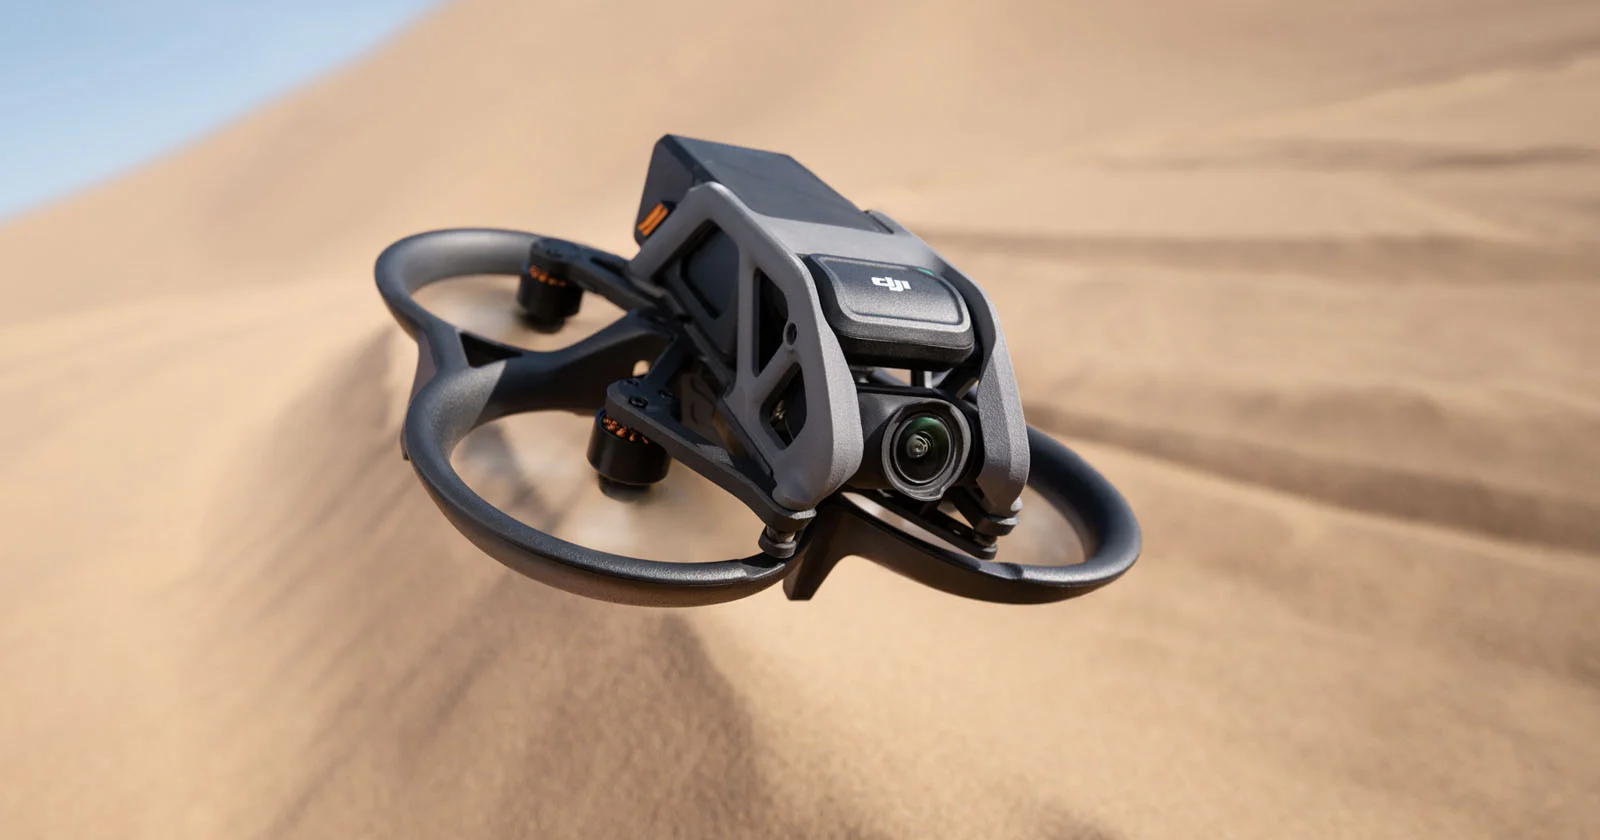 The DJI Avata is a Compact FPV Drone for Designed for Everyone